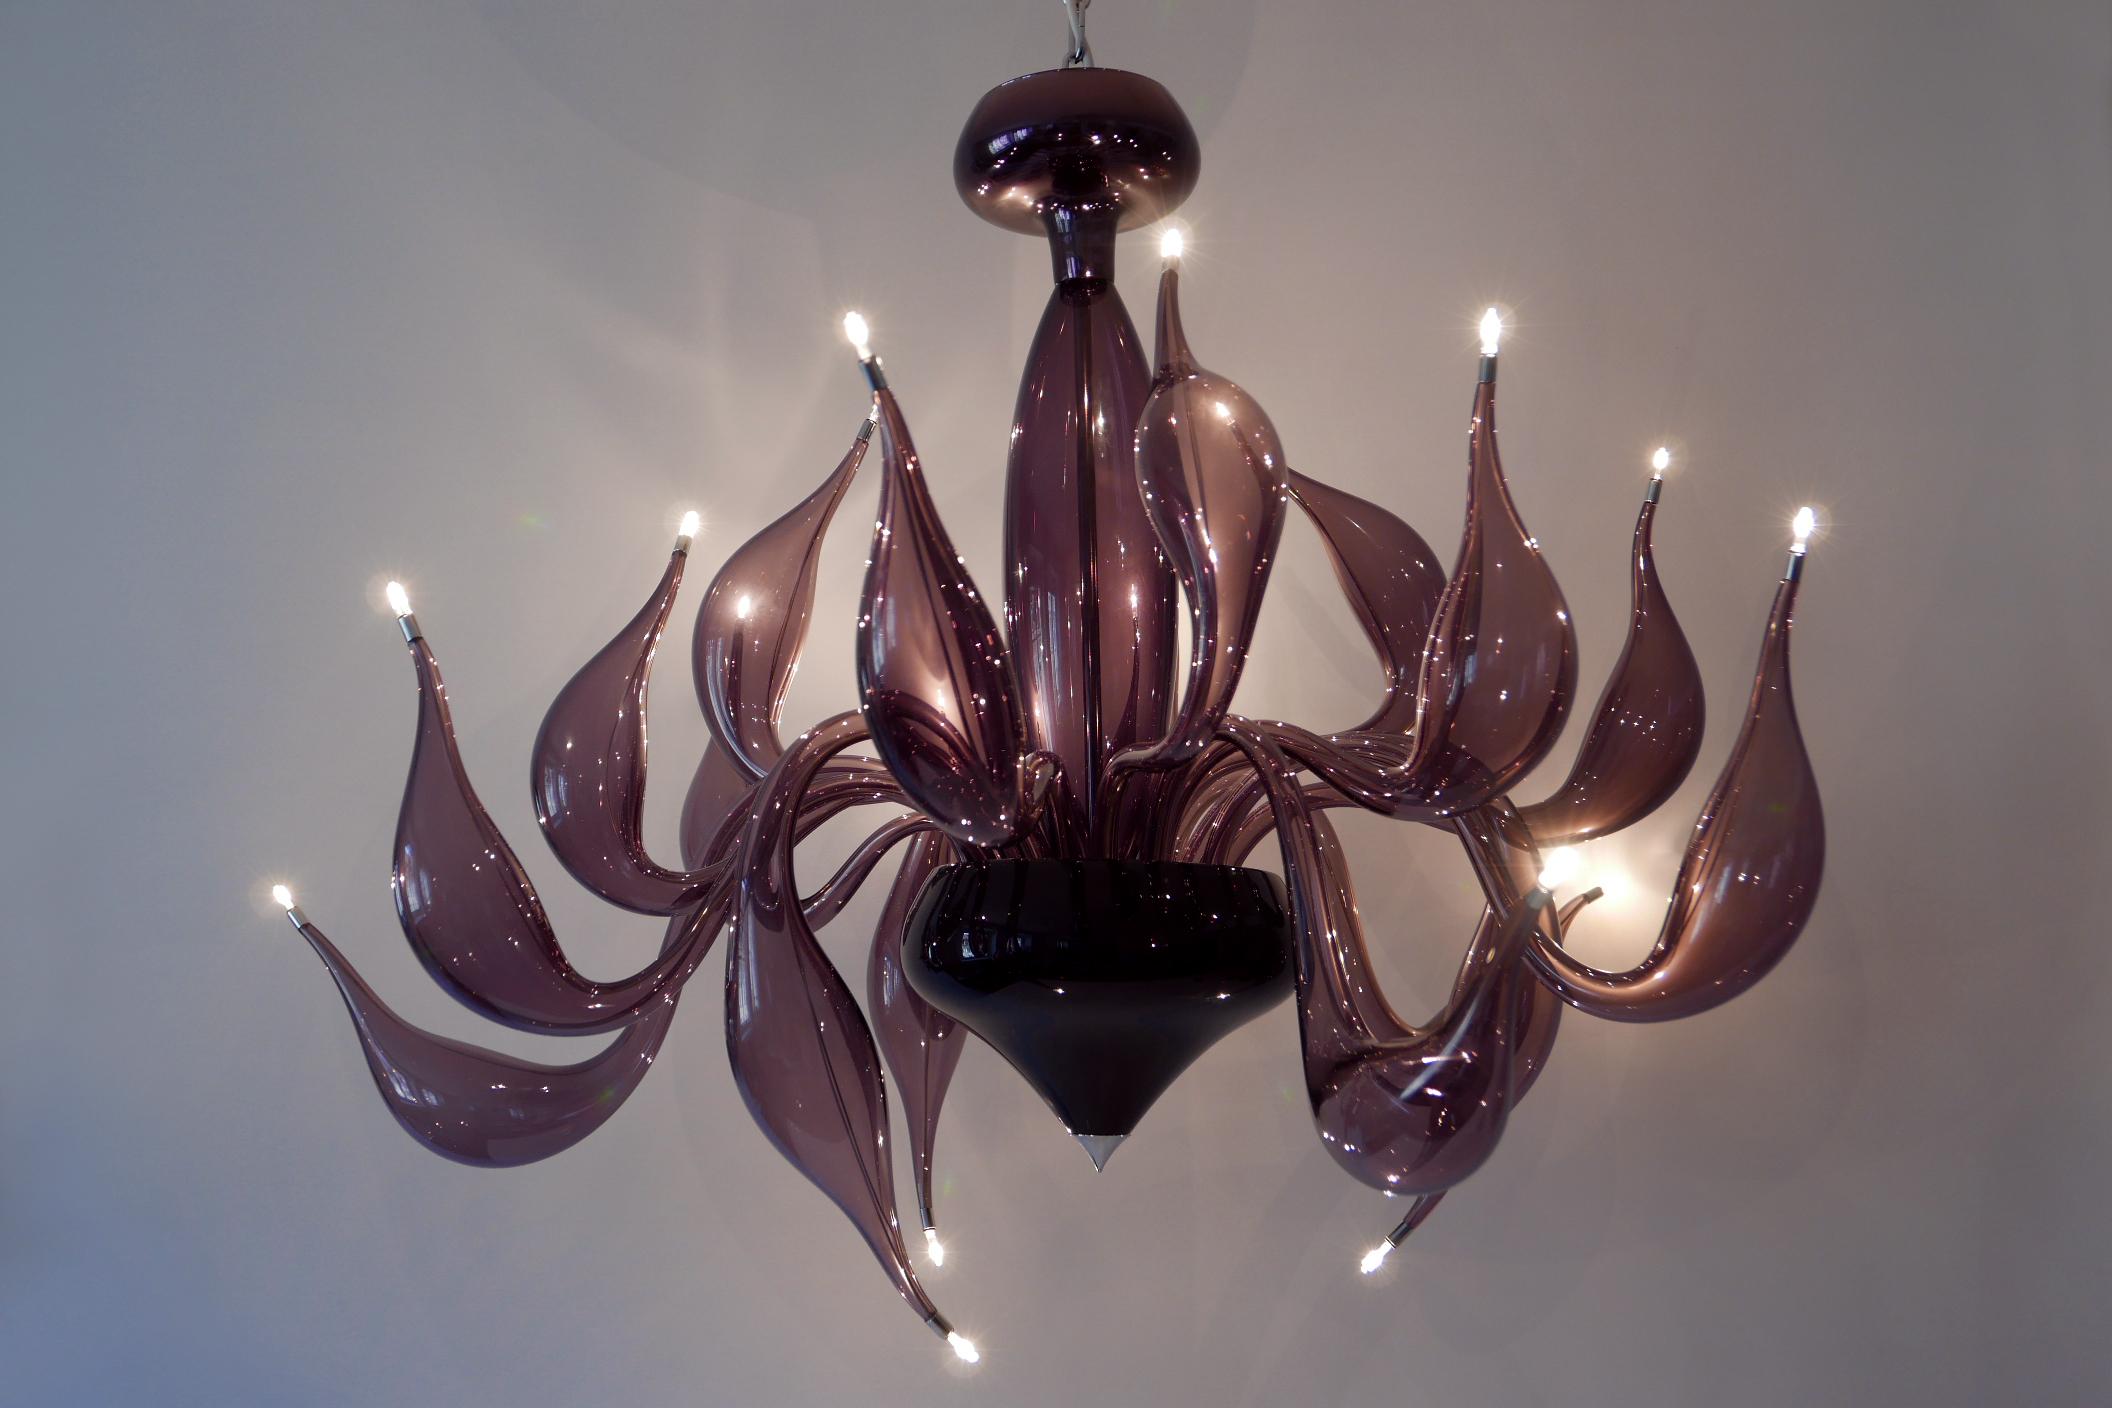 Contemporary Sculptural Lu Murano Chandelier 18 Lights by Fabio Fornasier, 2004, Italy For Sale